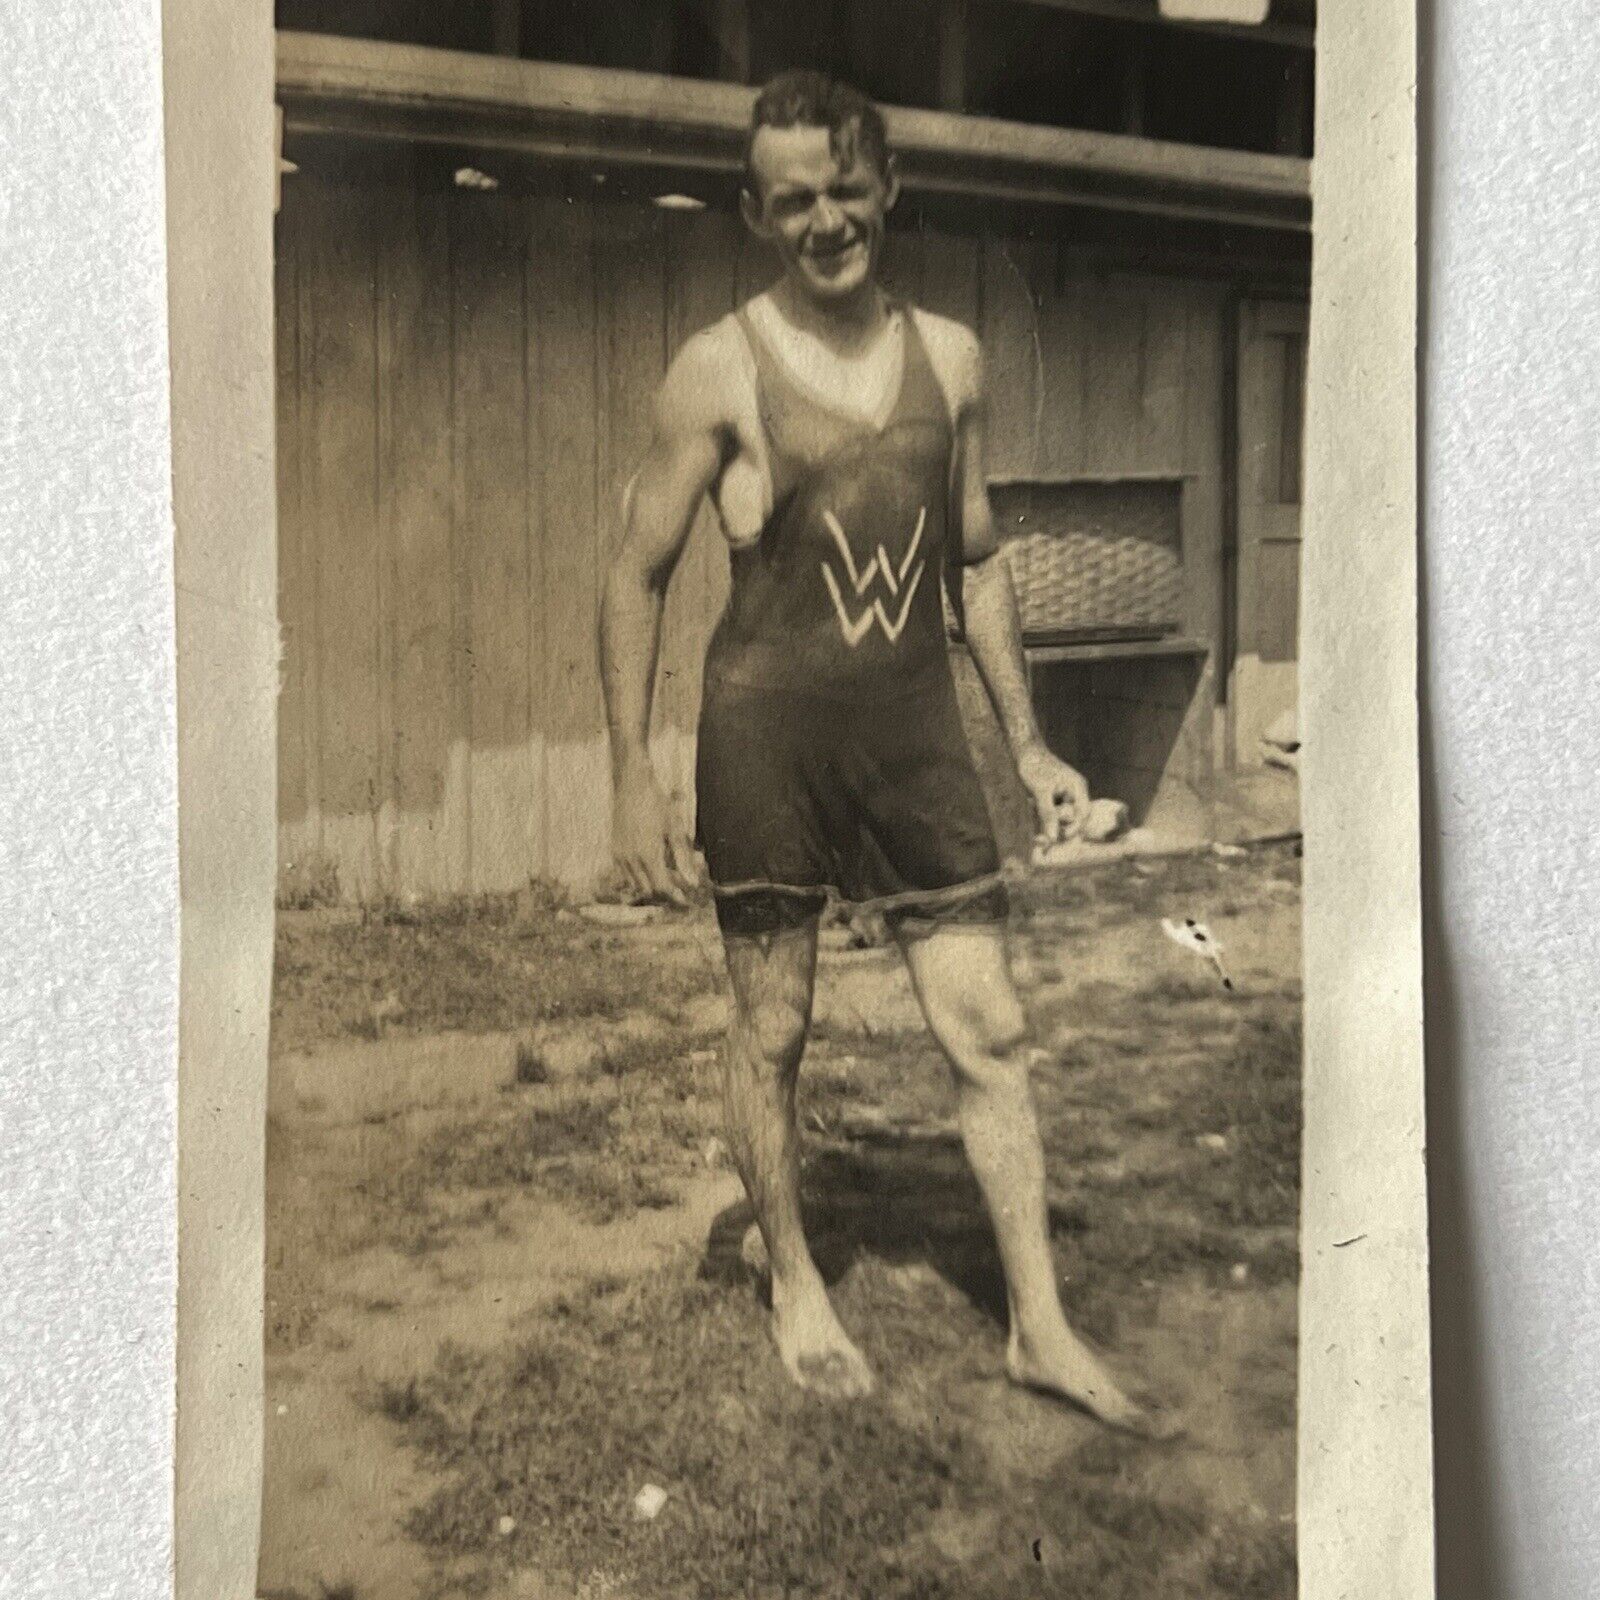 Antique Sepia Snapshot Photograph Handsome Young Man WW Bathing Suit Gay Int